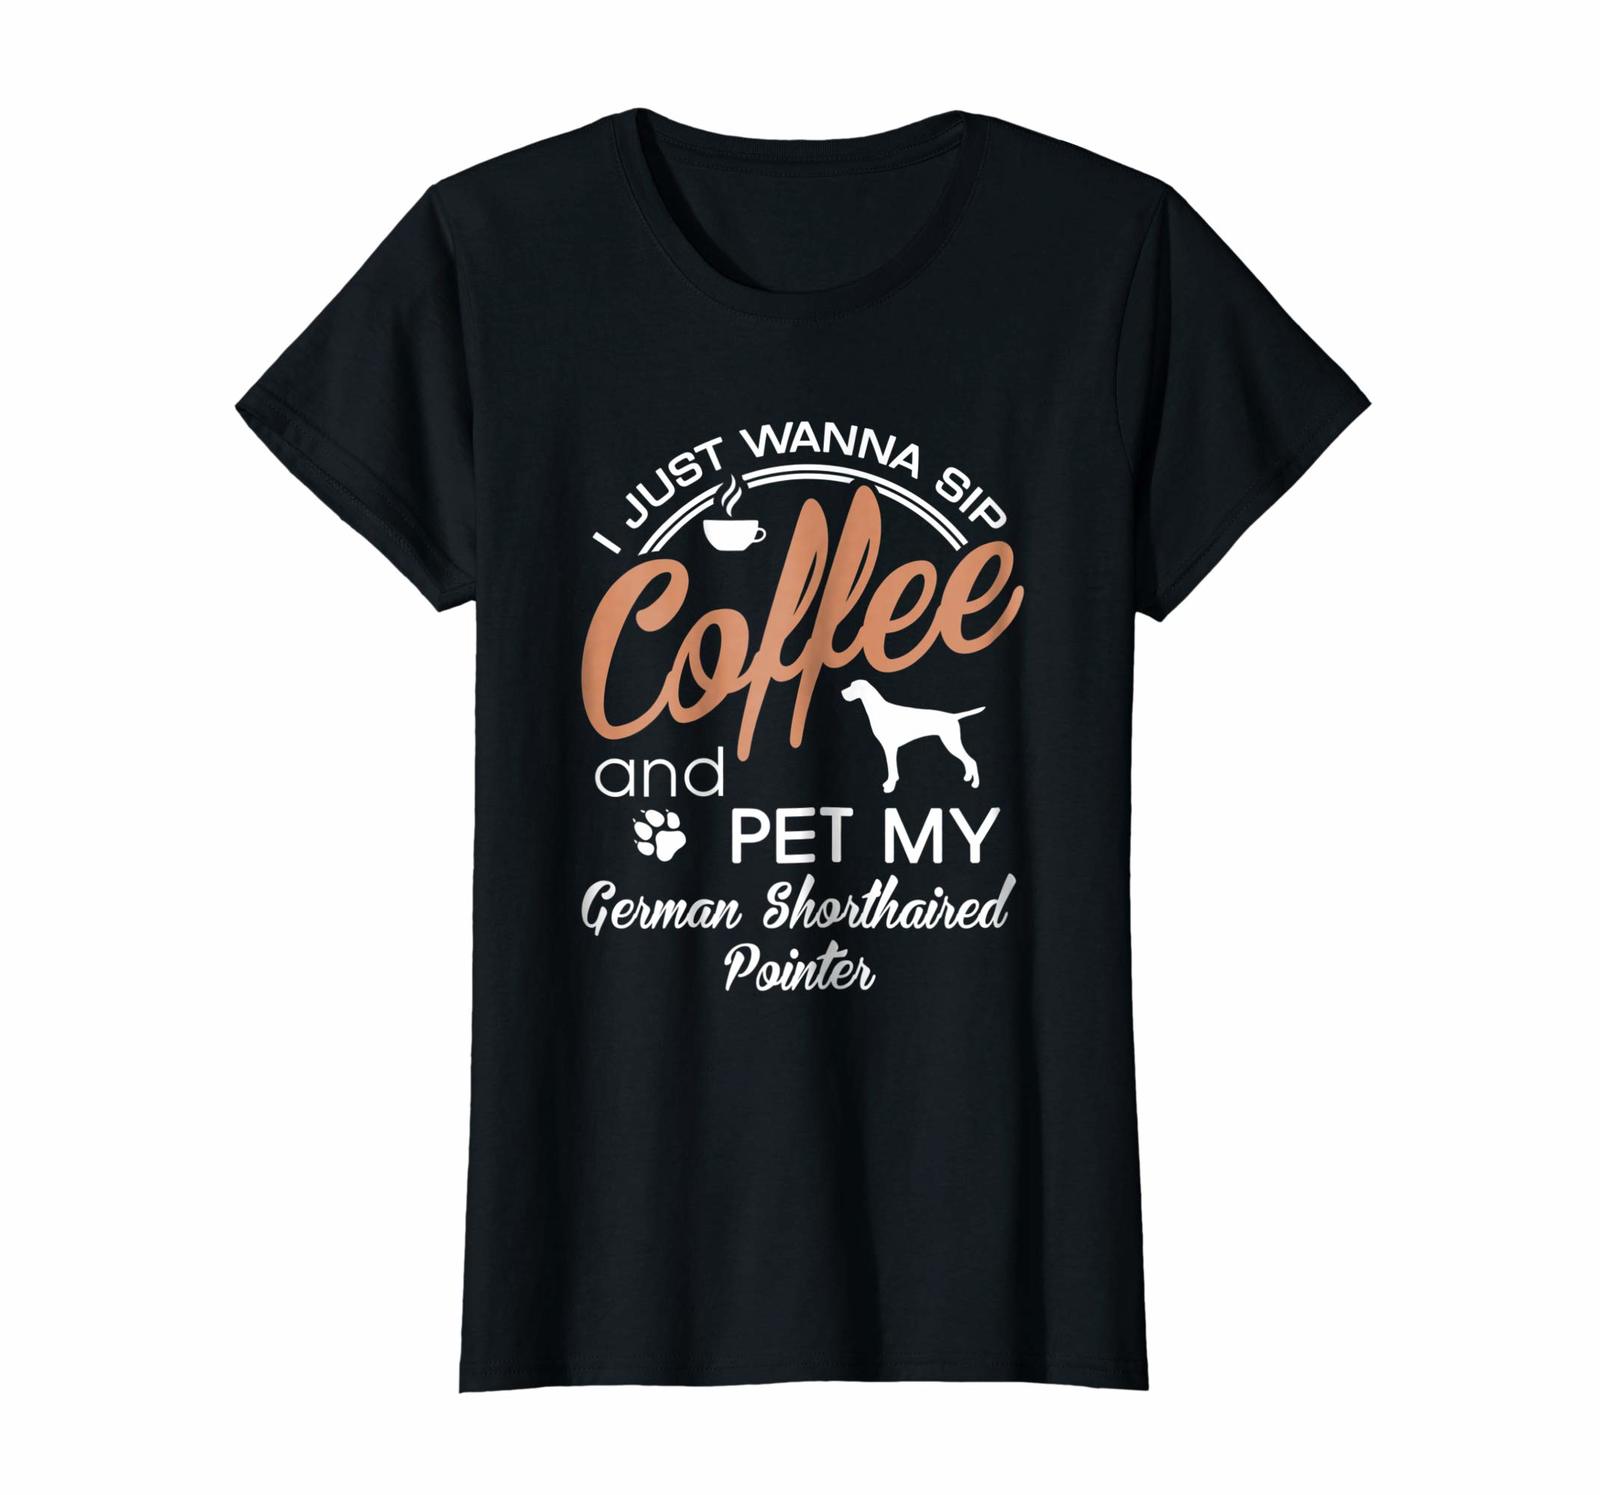 Dog Fashion - Sip coffee and pet my German Shorthaired Pointer Funny Gift Wowen